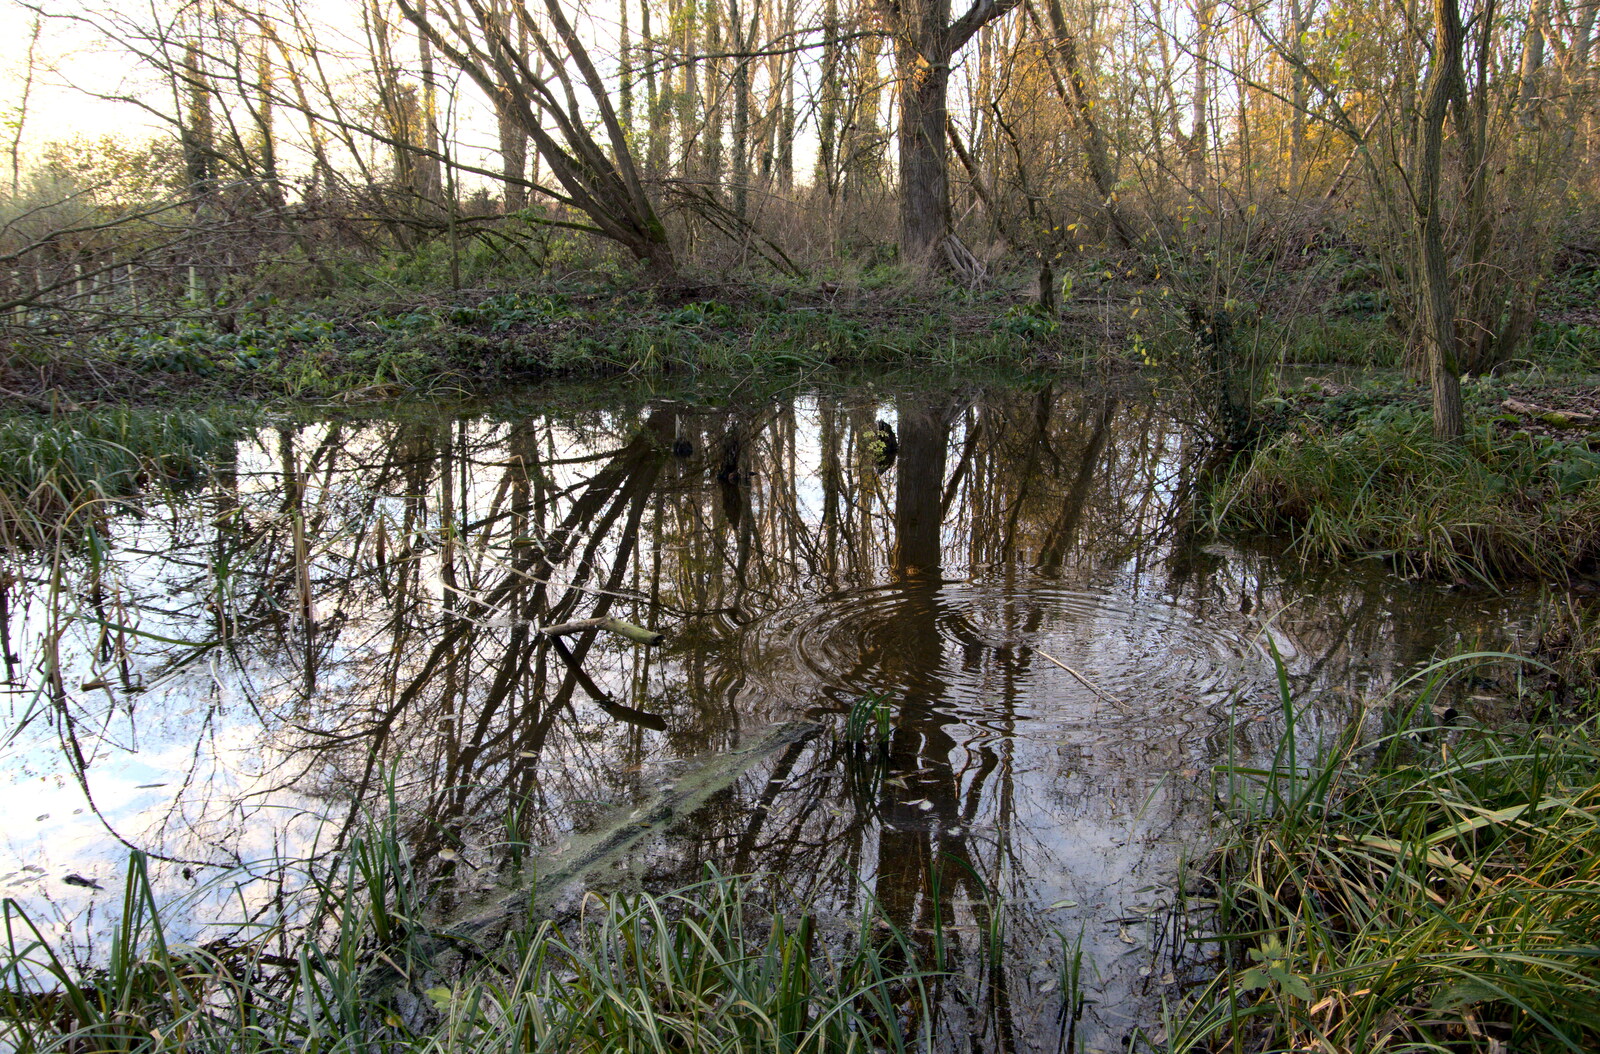 Ripples on a pond from The Dereliction of Eye, Suffolk - 22nd November 2020